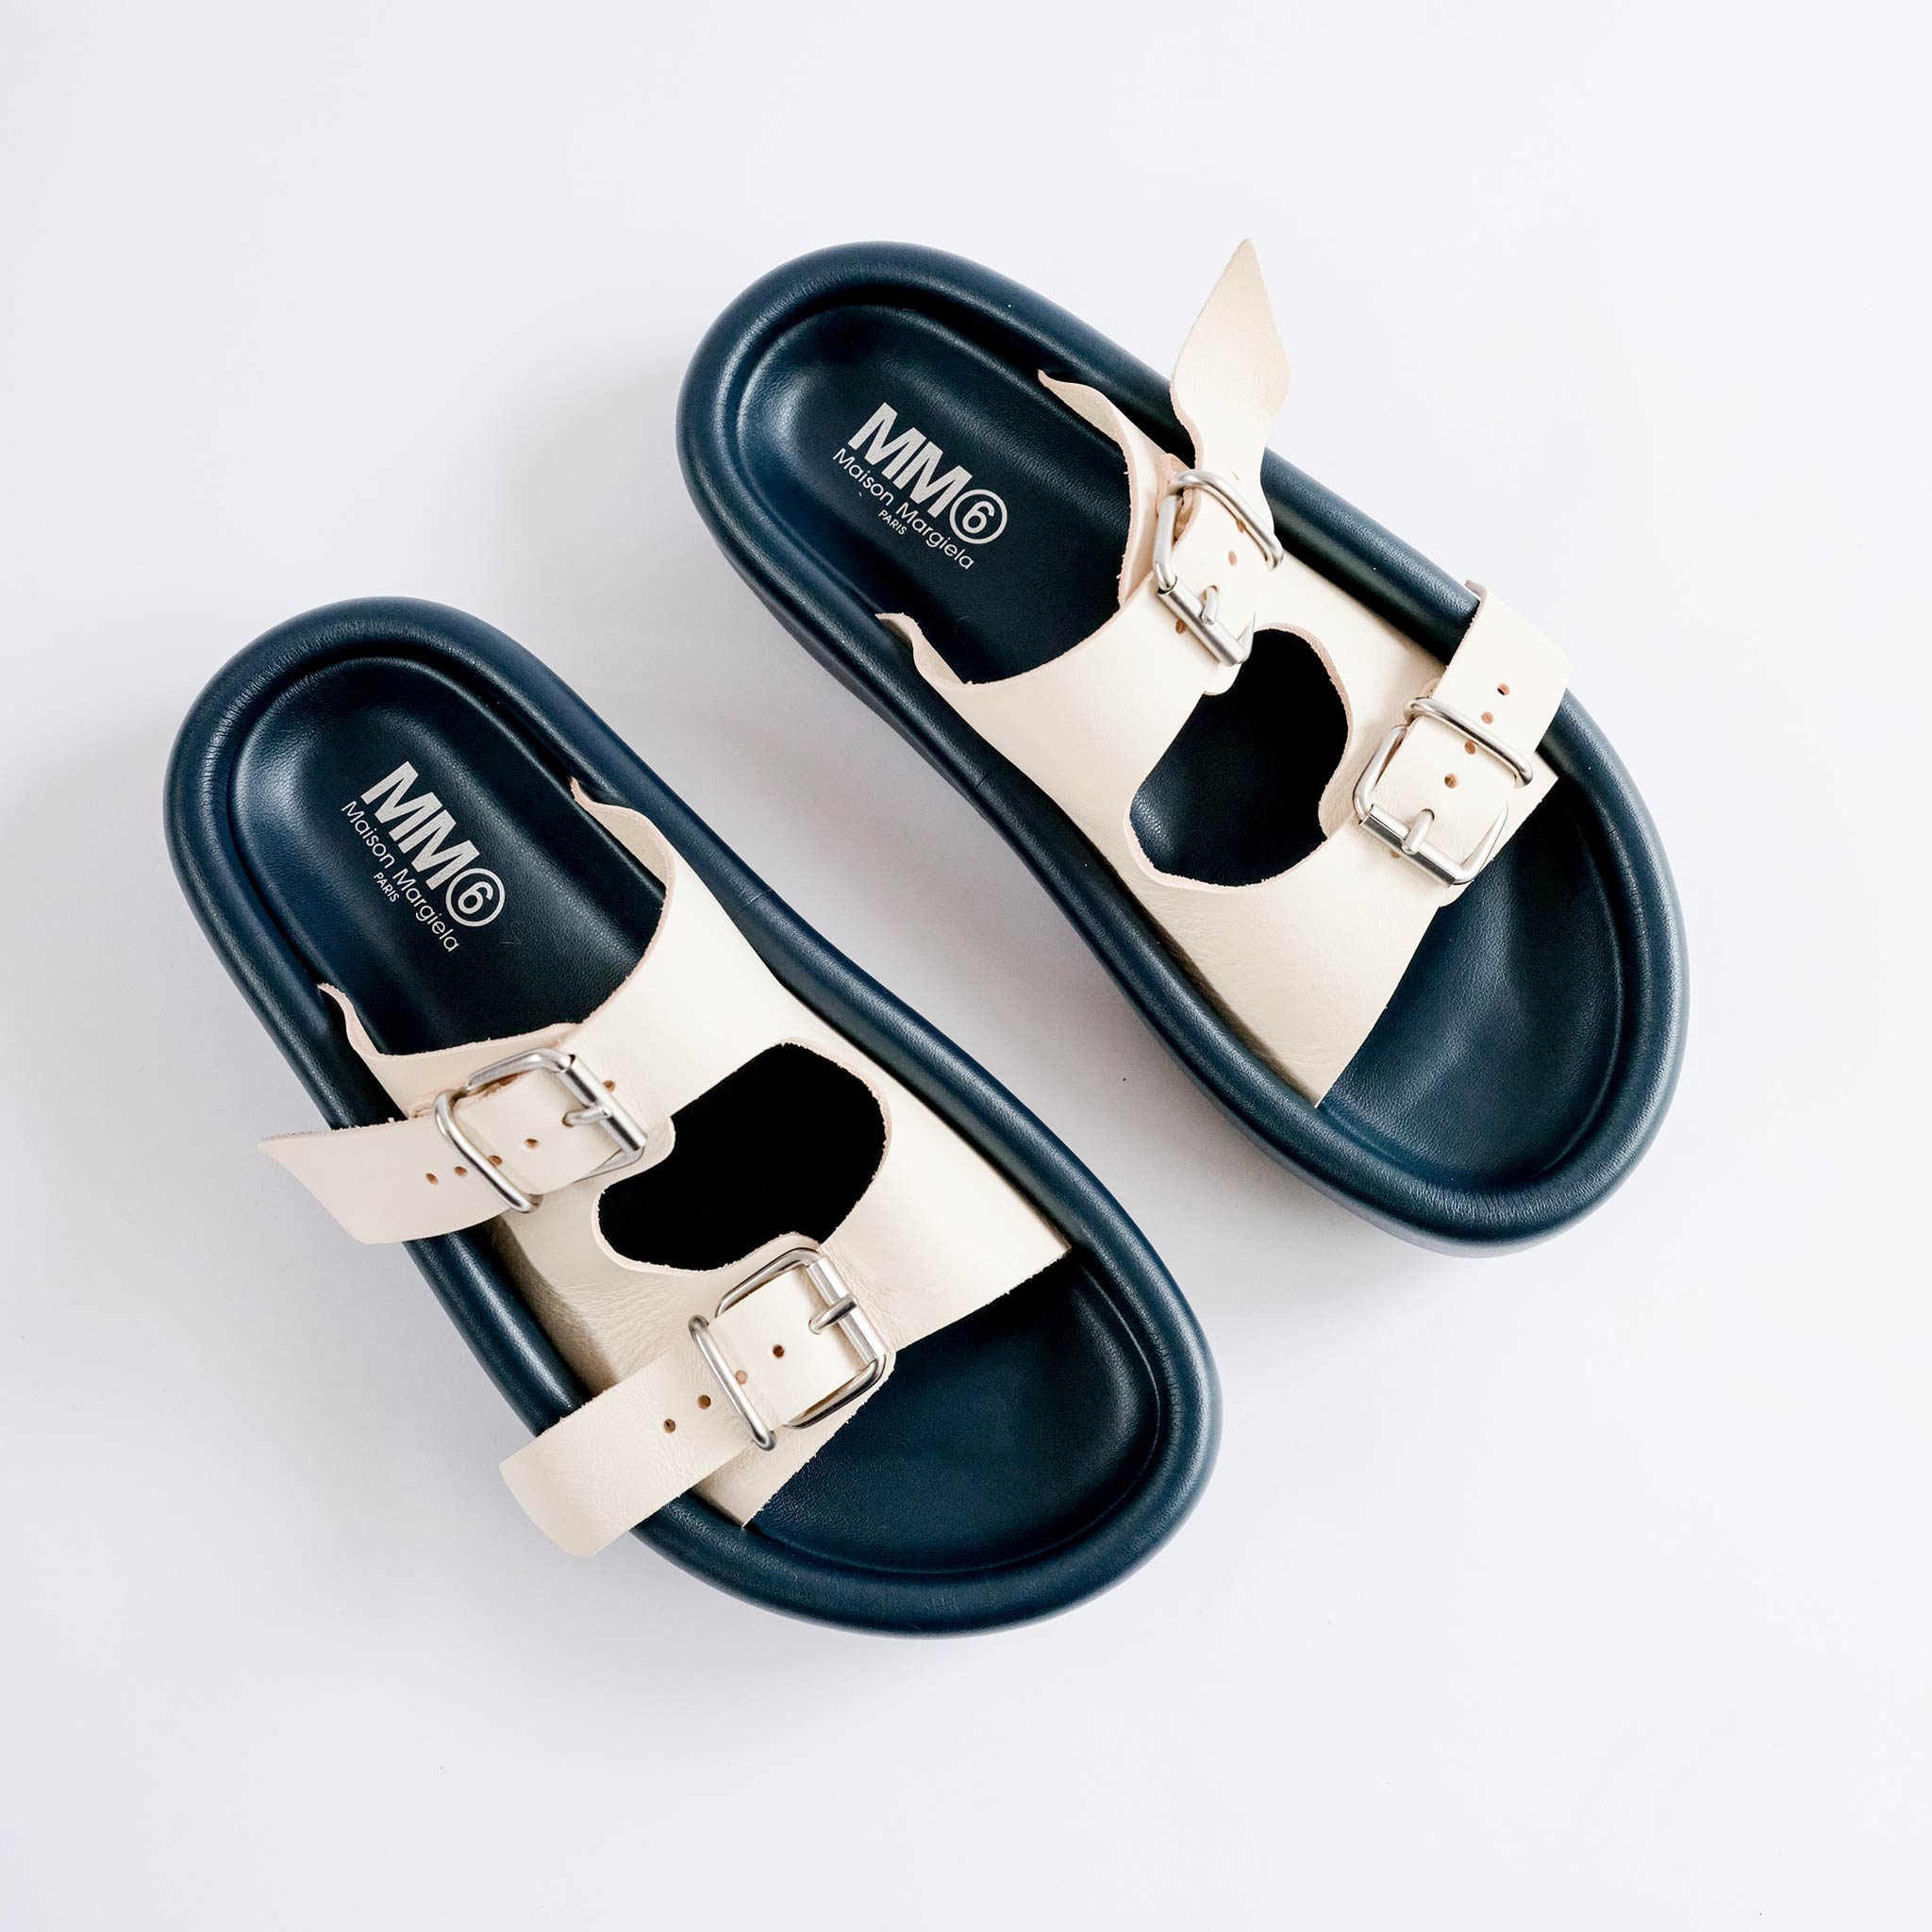 Top view of the Buckle Sandals - Black/Off White.